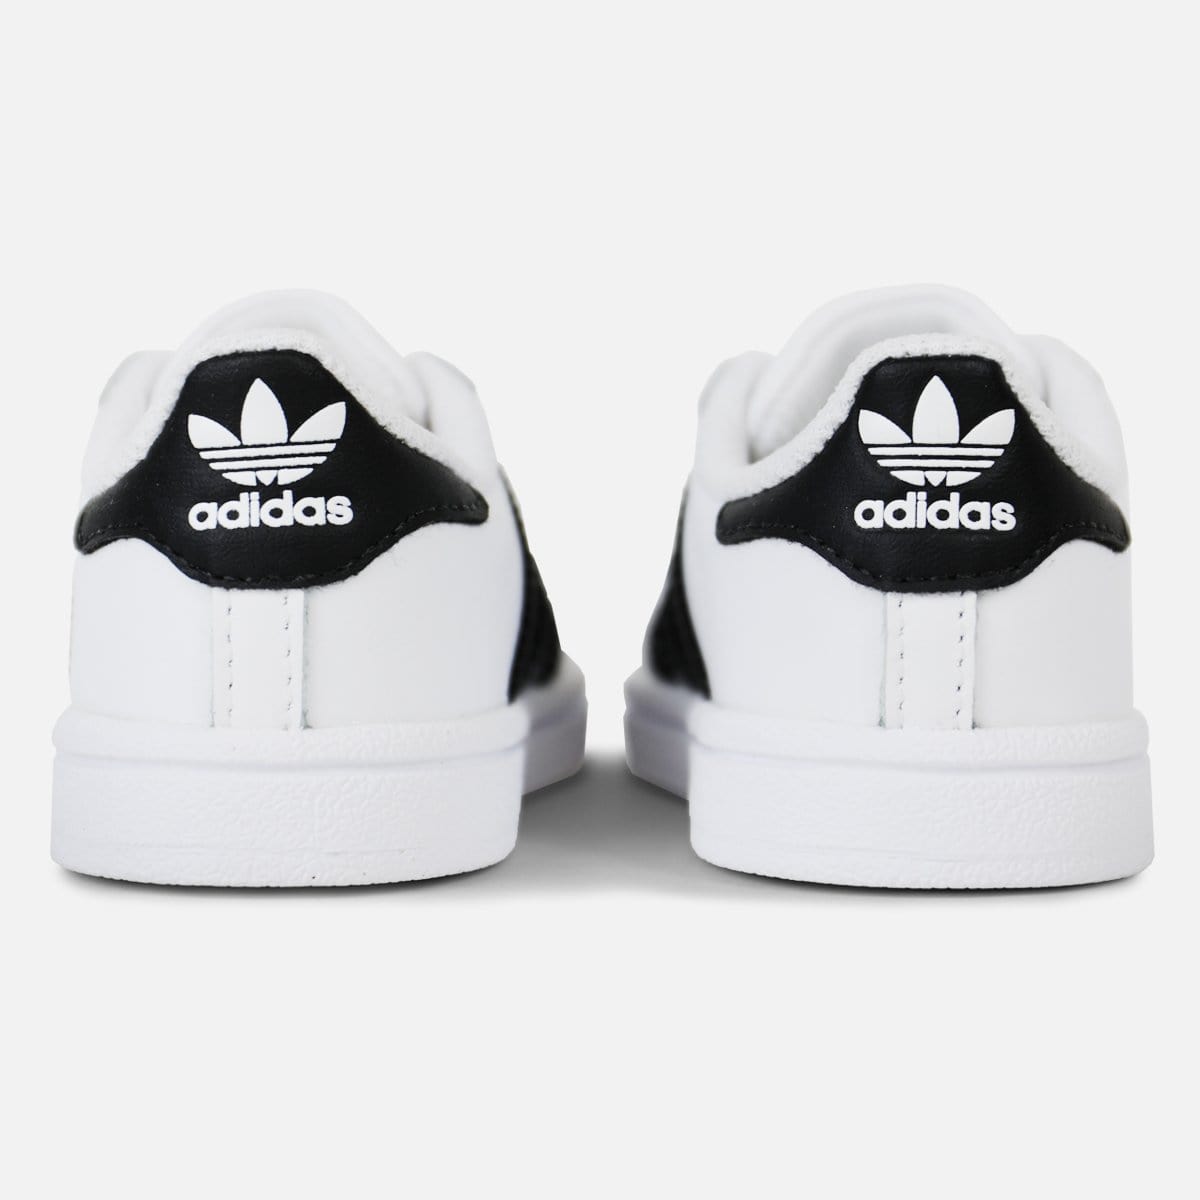 RUVilla.com is where to buy the adidas Superstar Infant (White/Core Black)!